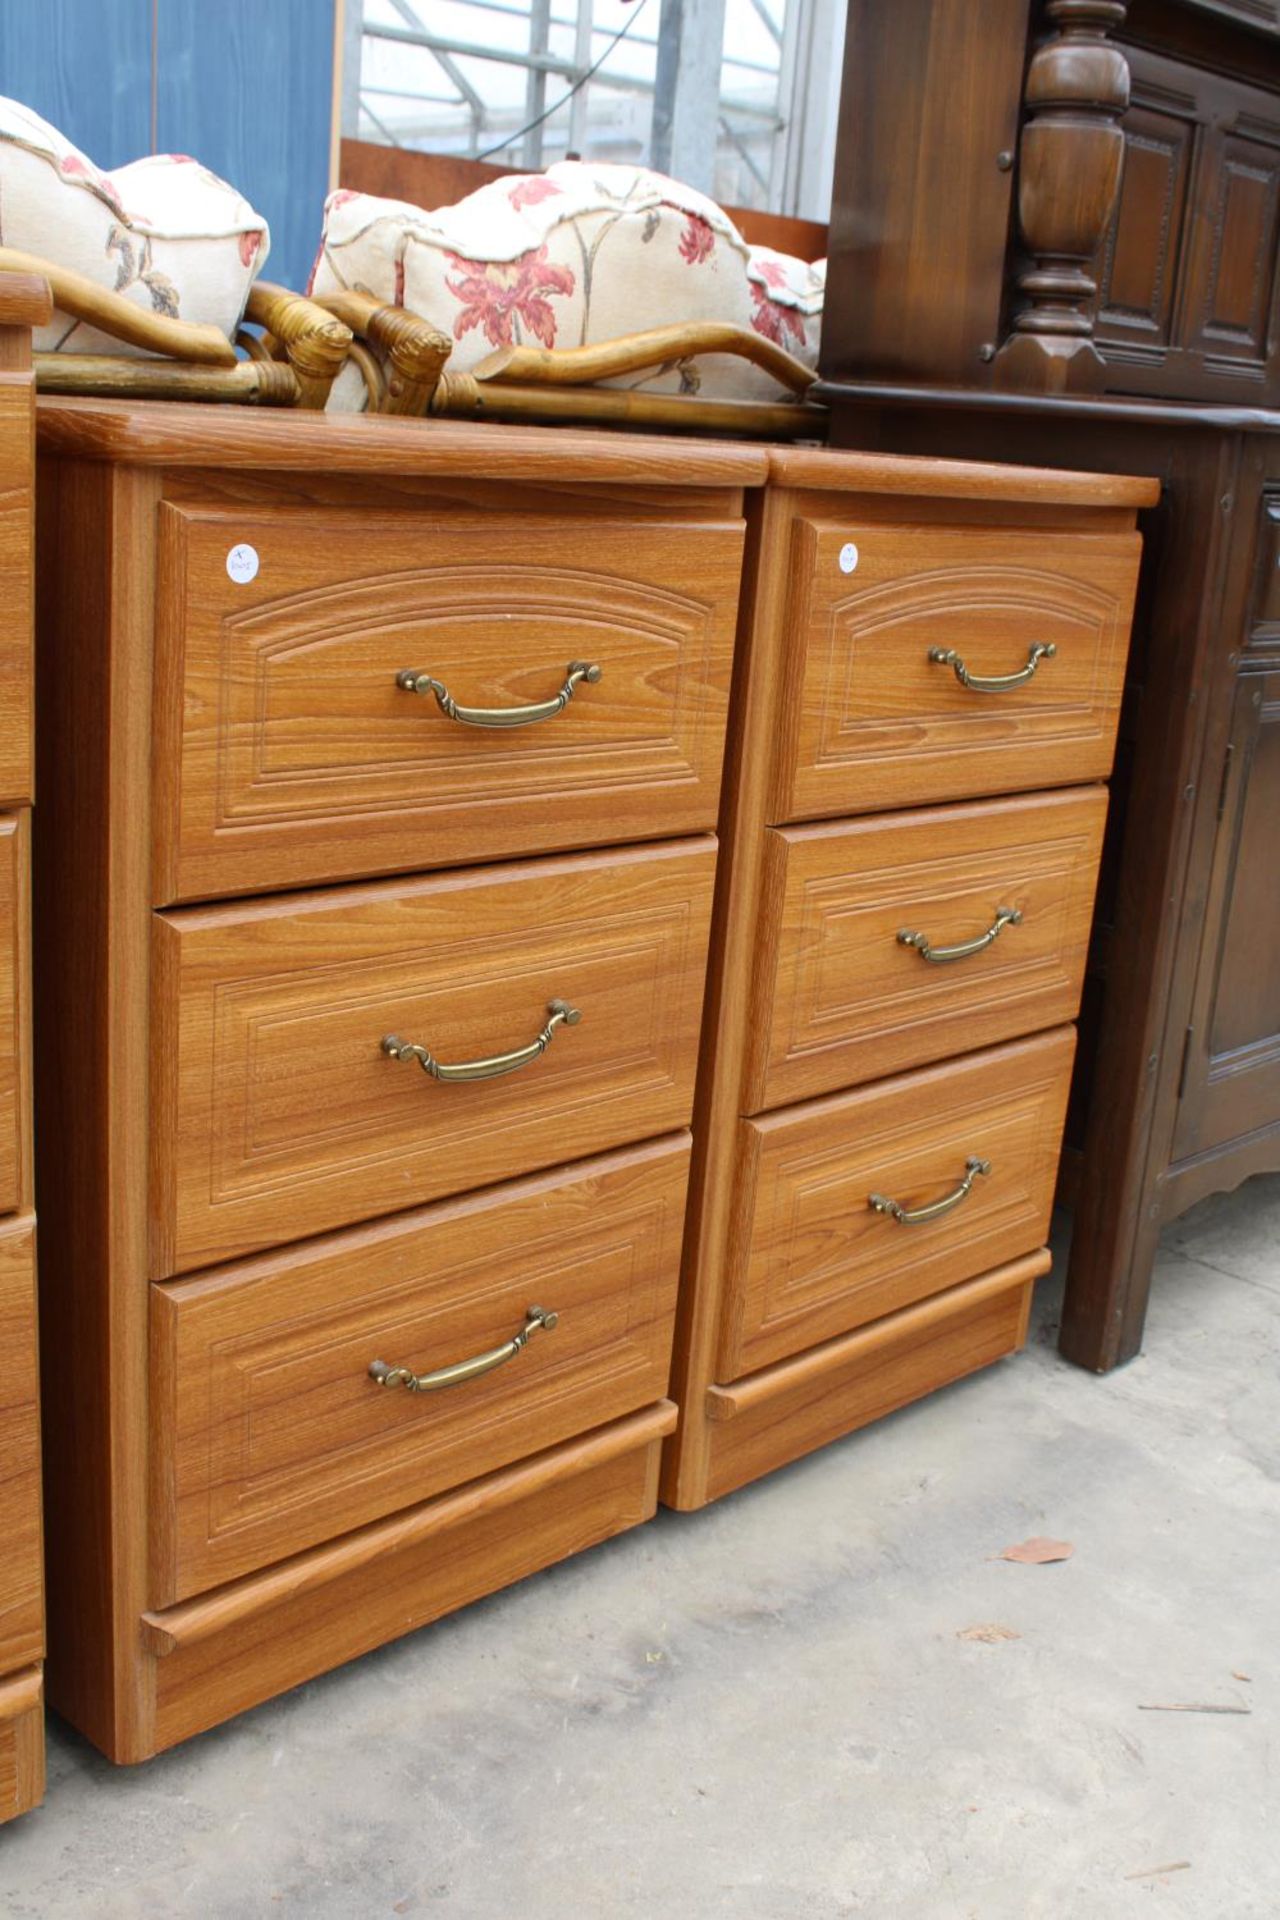 A PAIR OF ALSTONS BEDSIDE CHESTS - Image 2 of 3